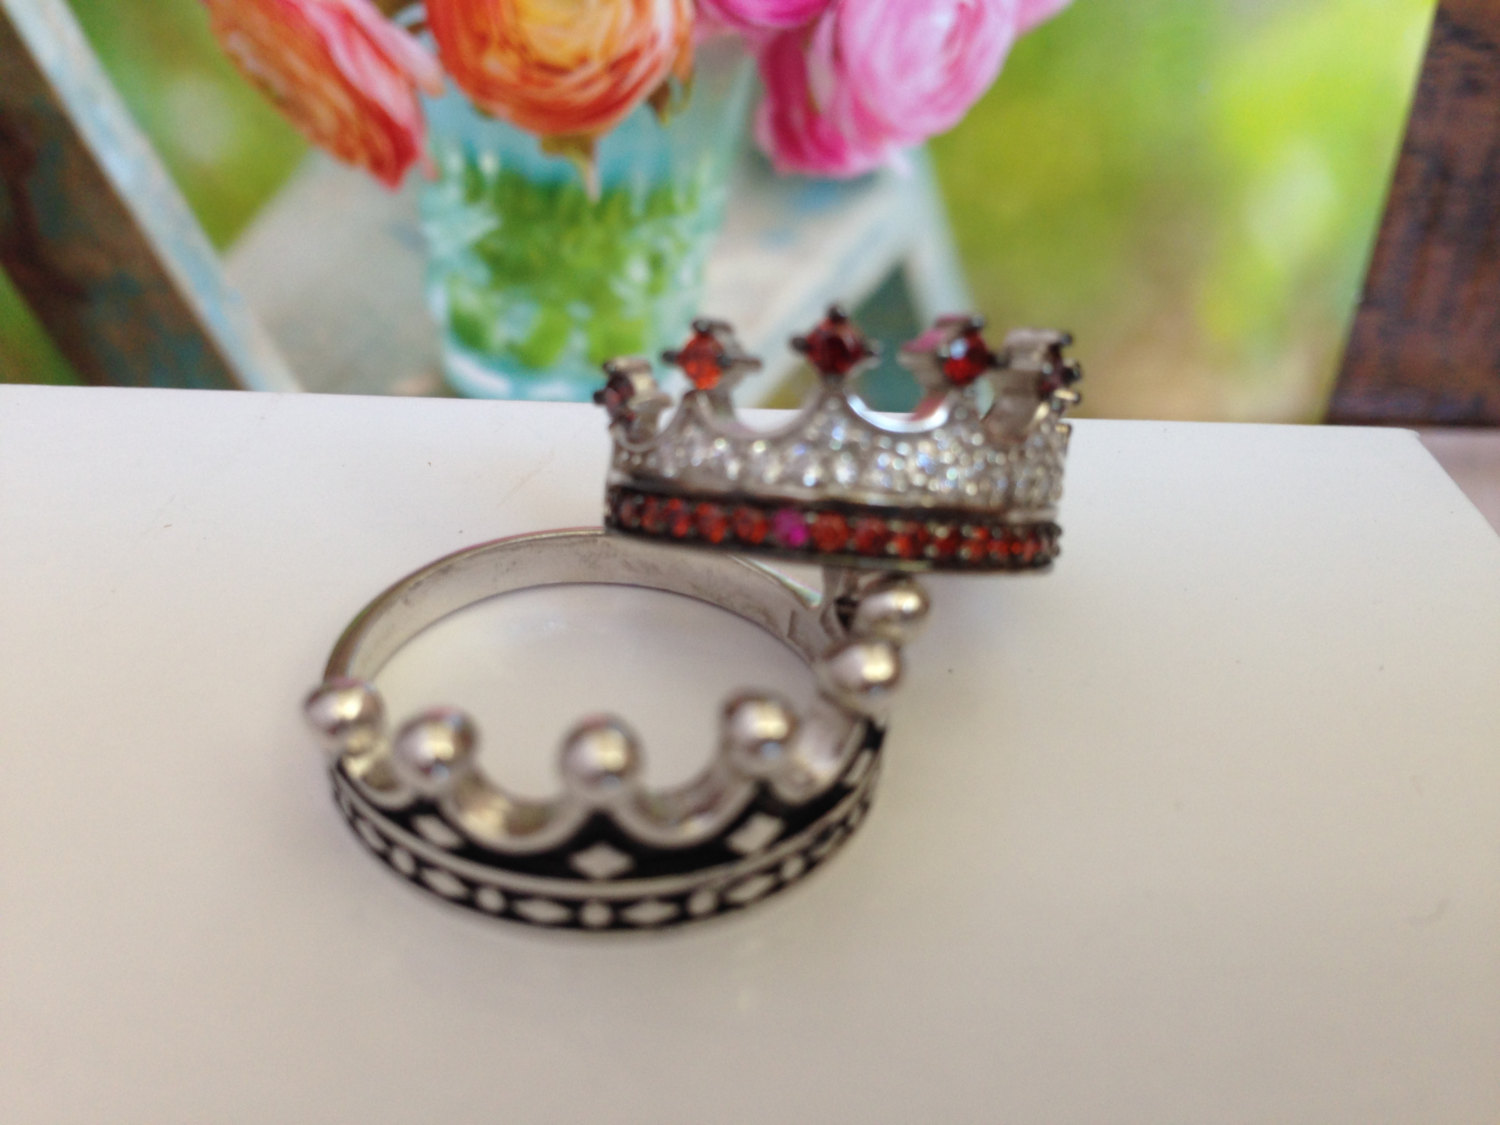 King & Queen ring, crown ring set,gold crown ring,925k silver decorated with high quality zircon as a set,promise rings